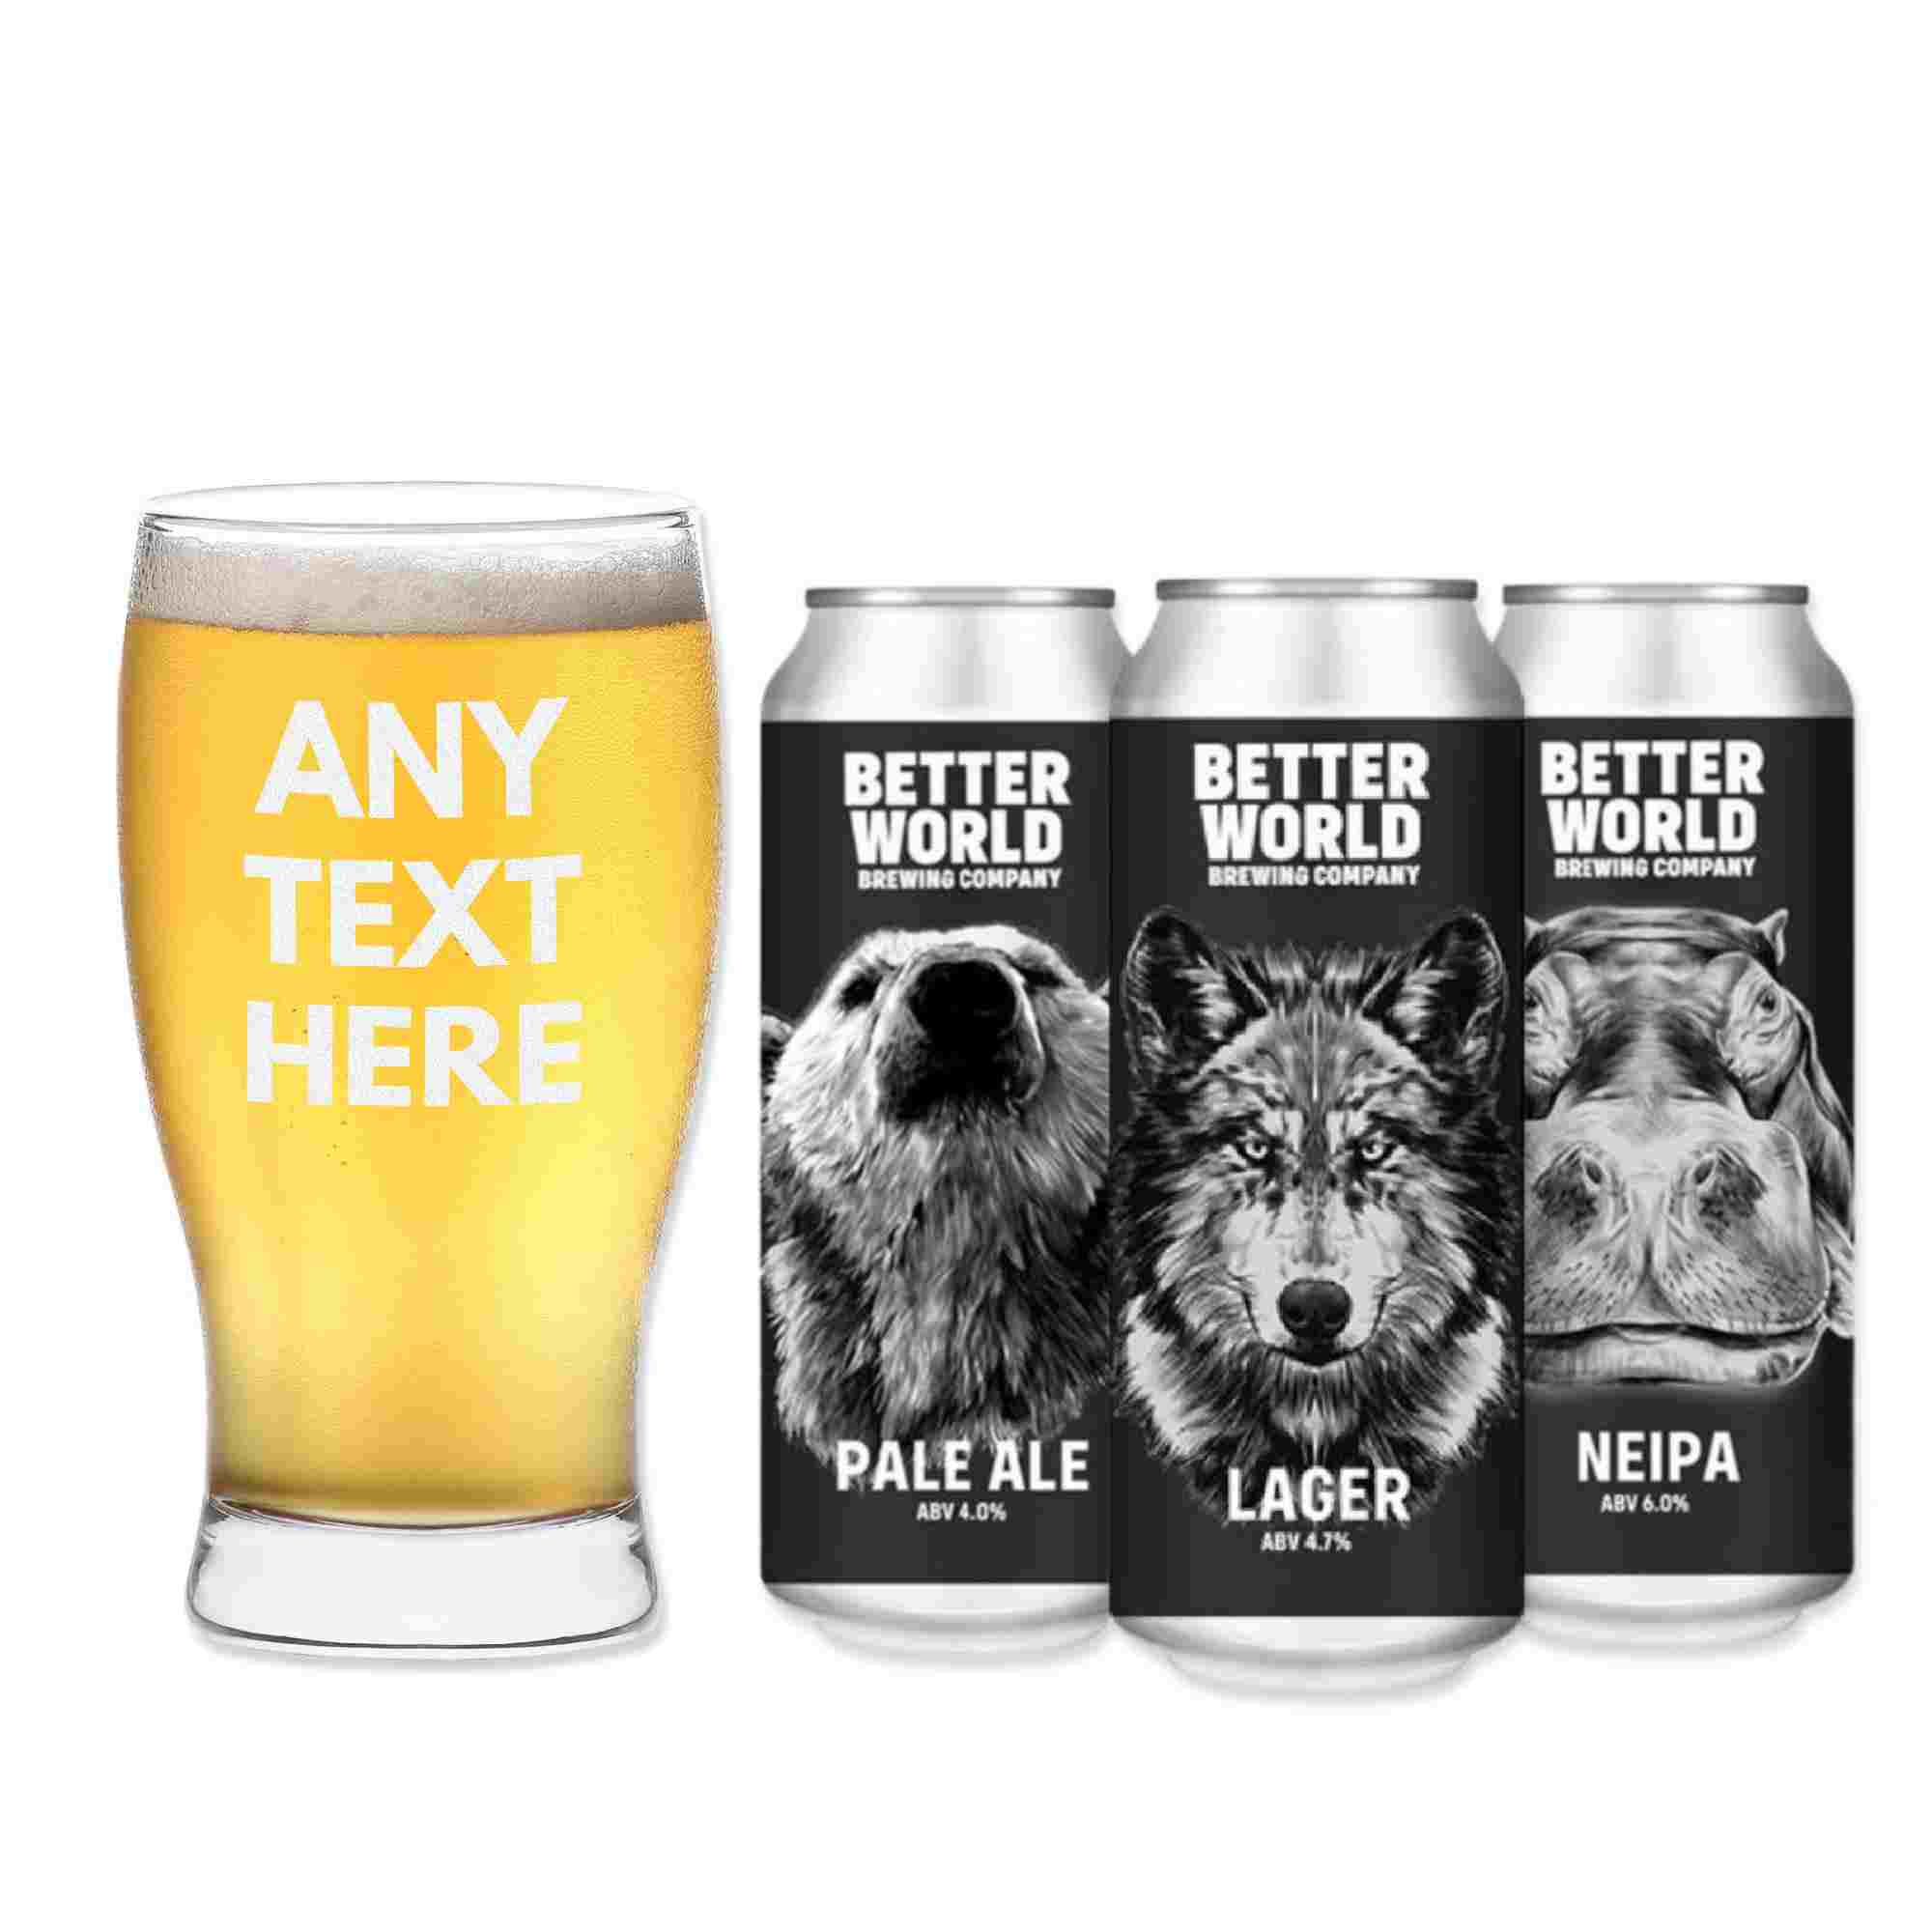 Personalised pint glass with 3 cans of better world beer